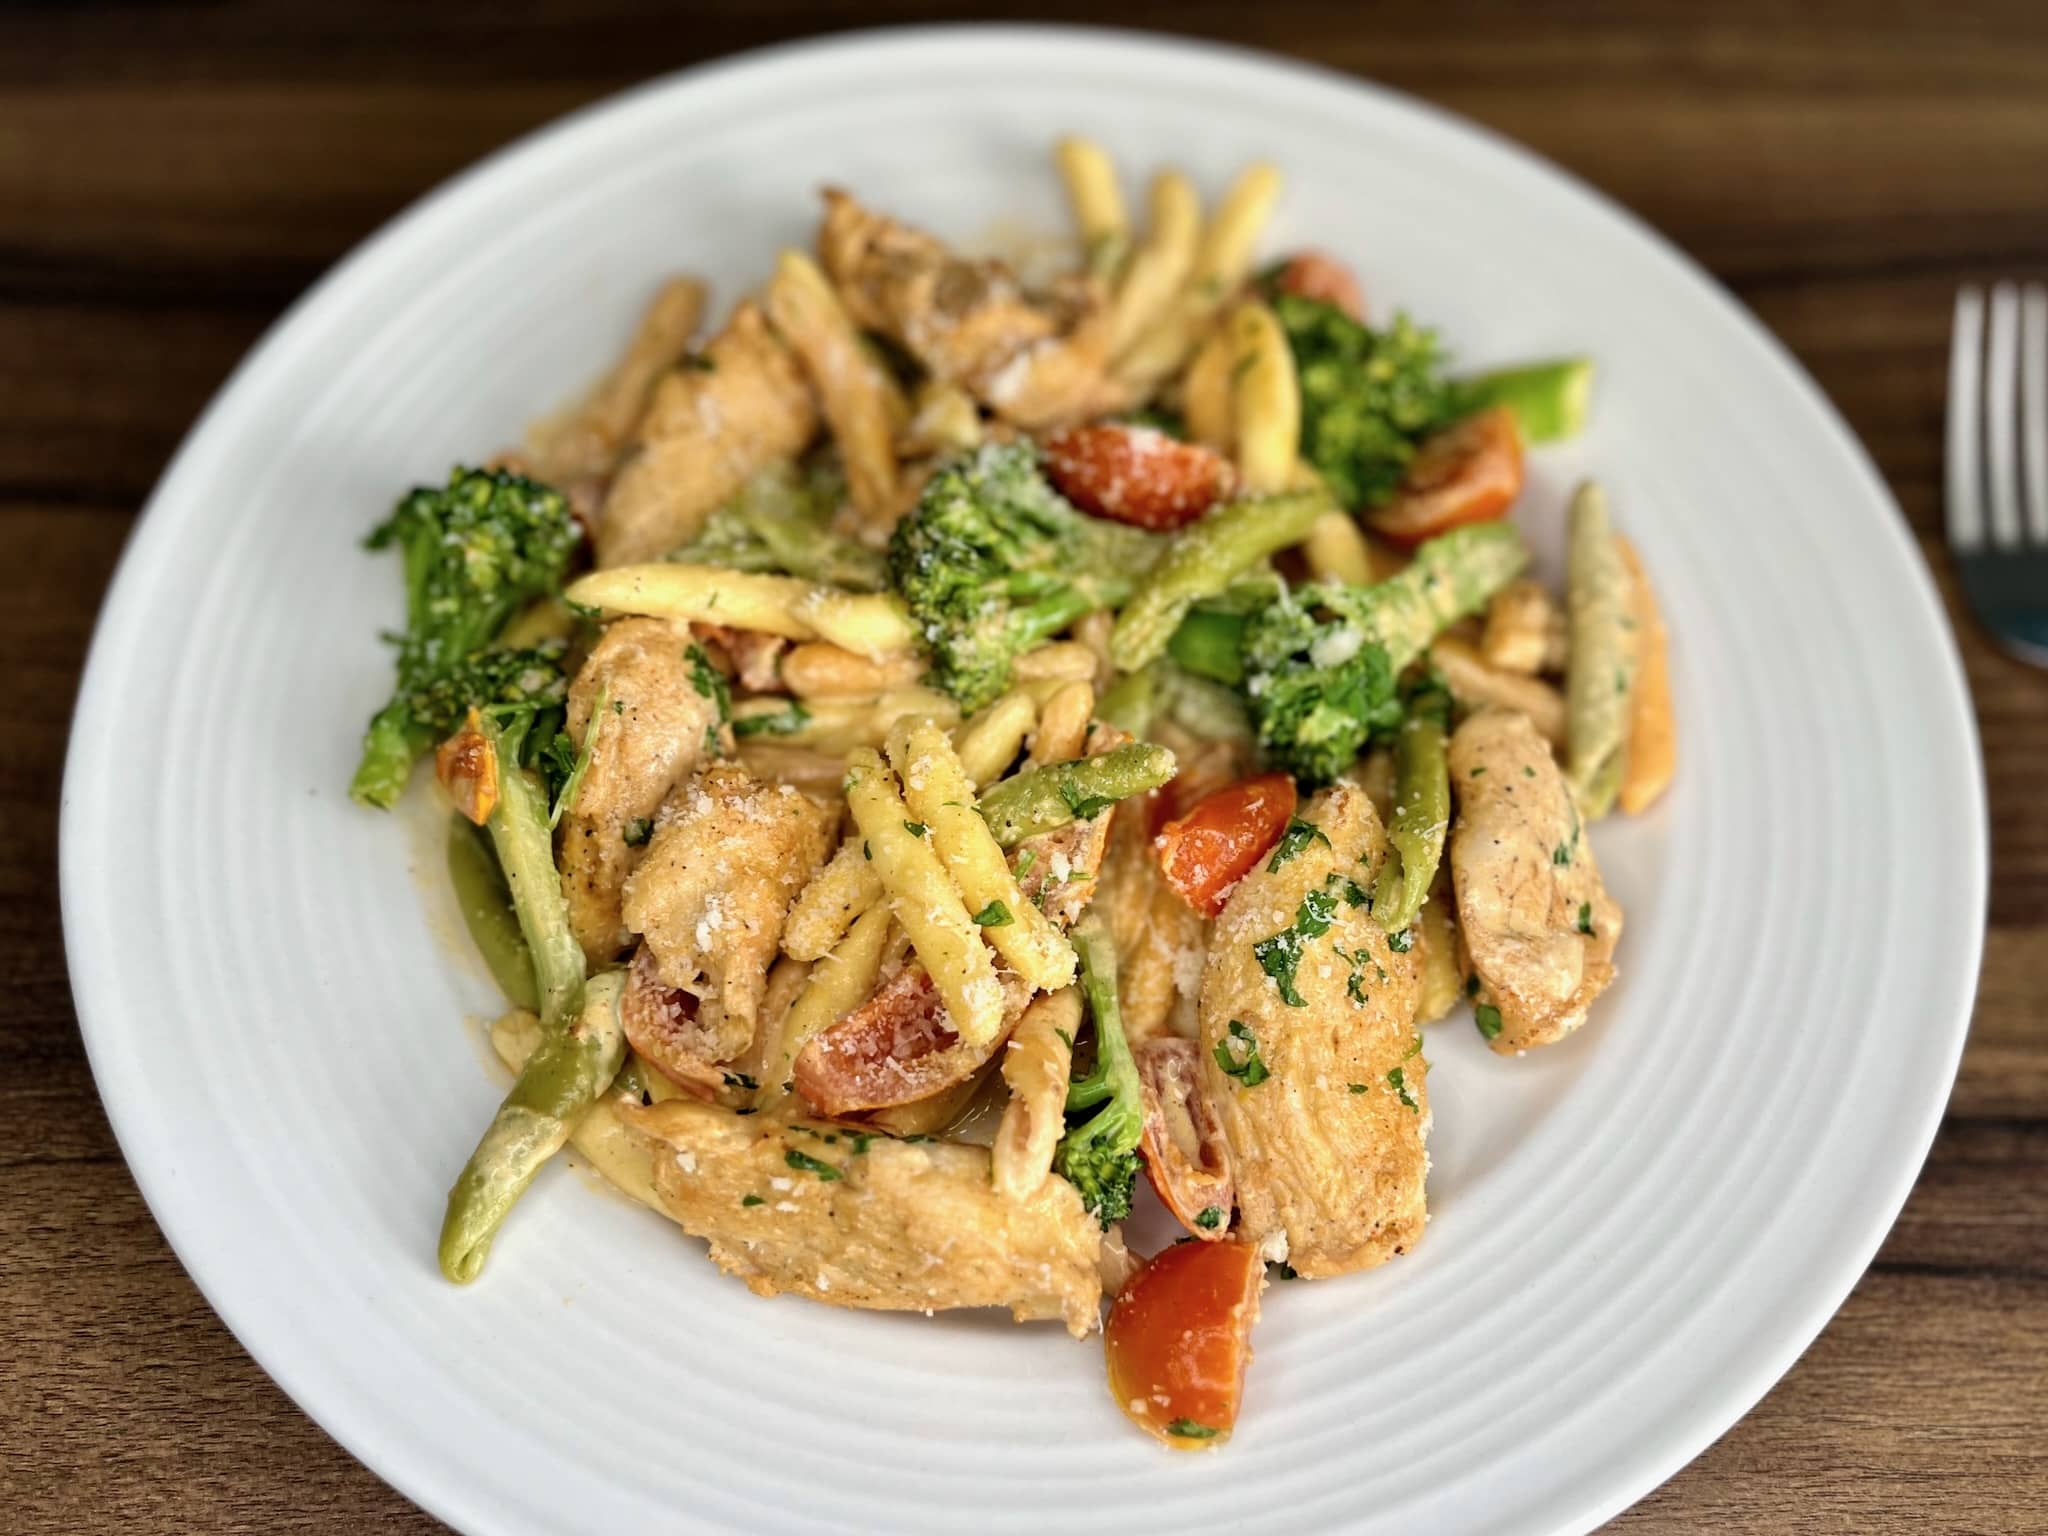 A generous portion of creamy chicken pasta with cherry tomatoes, served on a white plate.